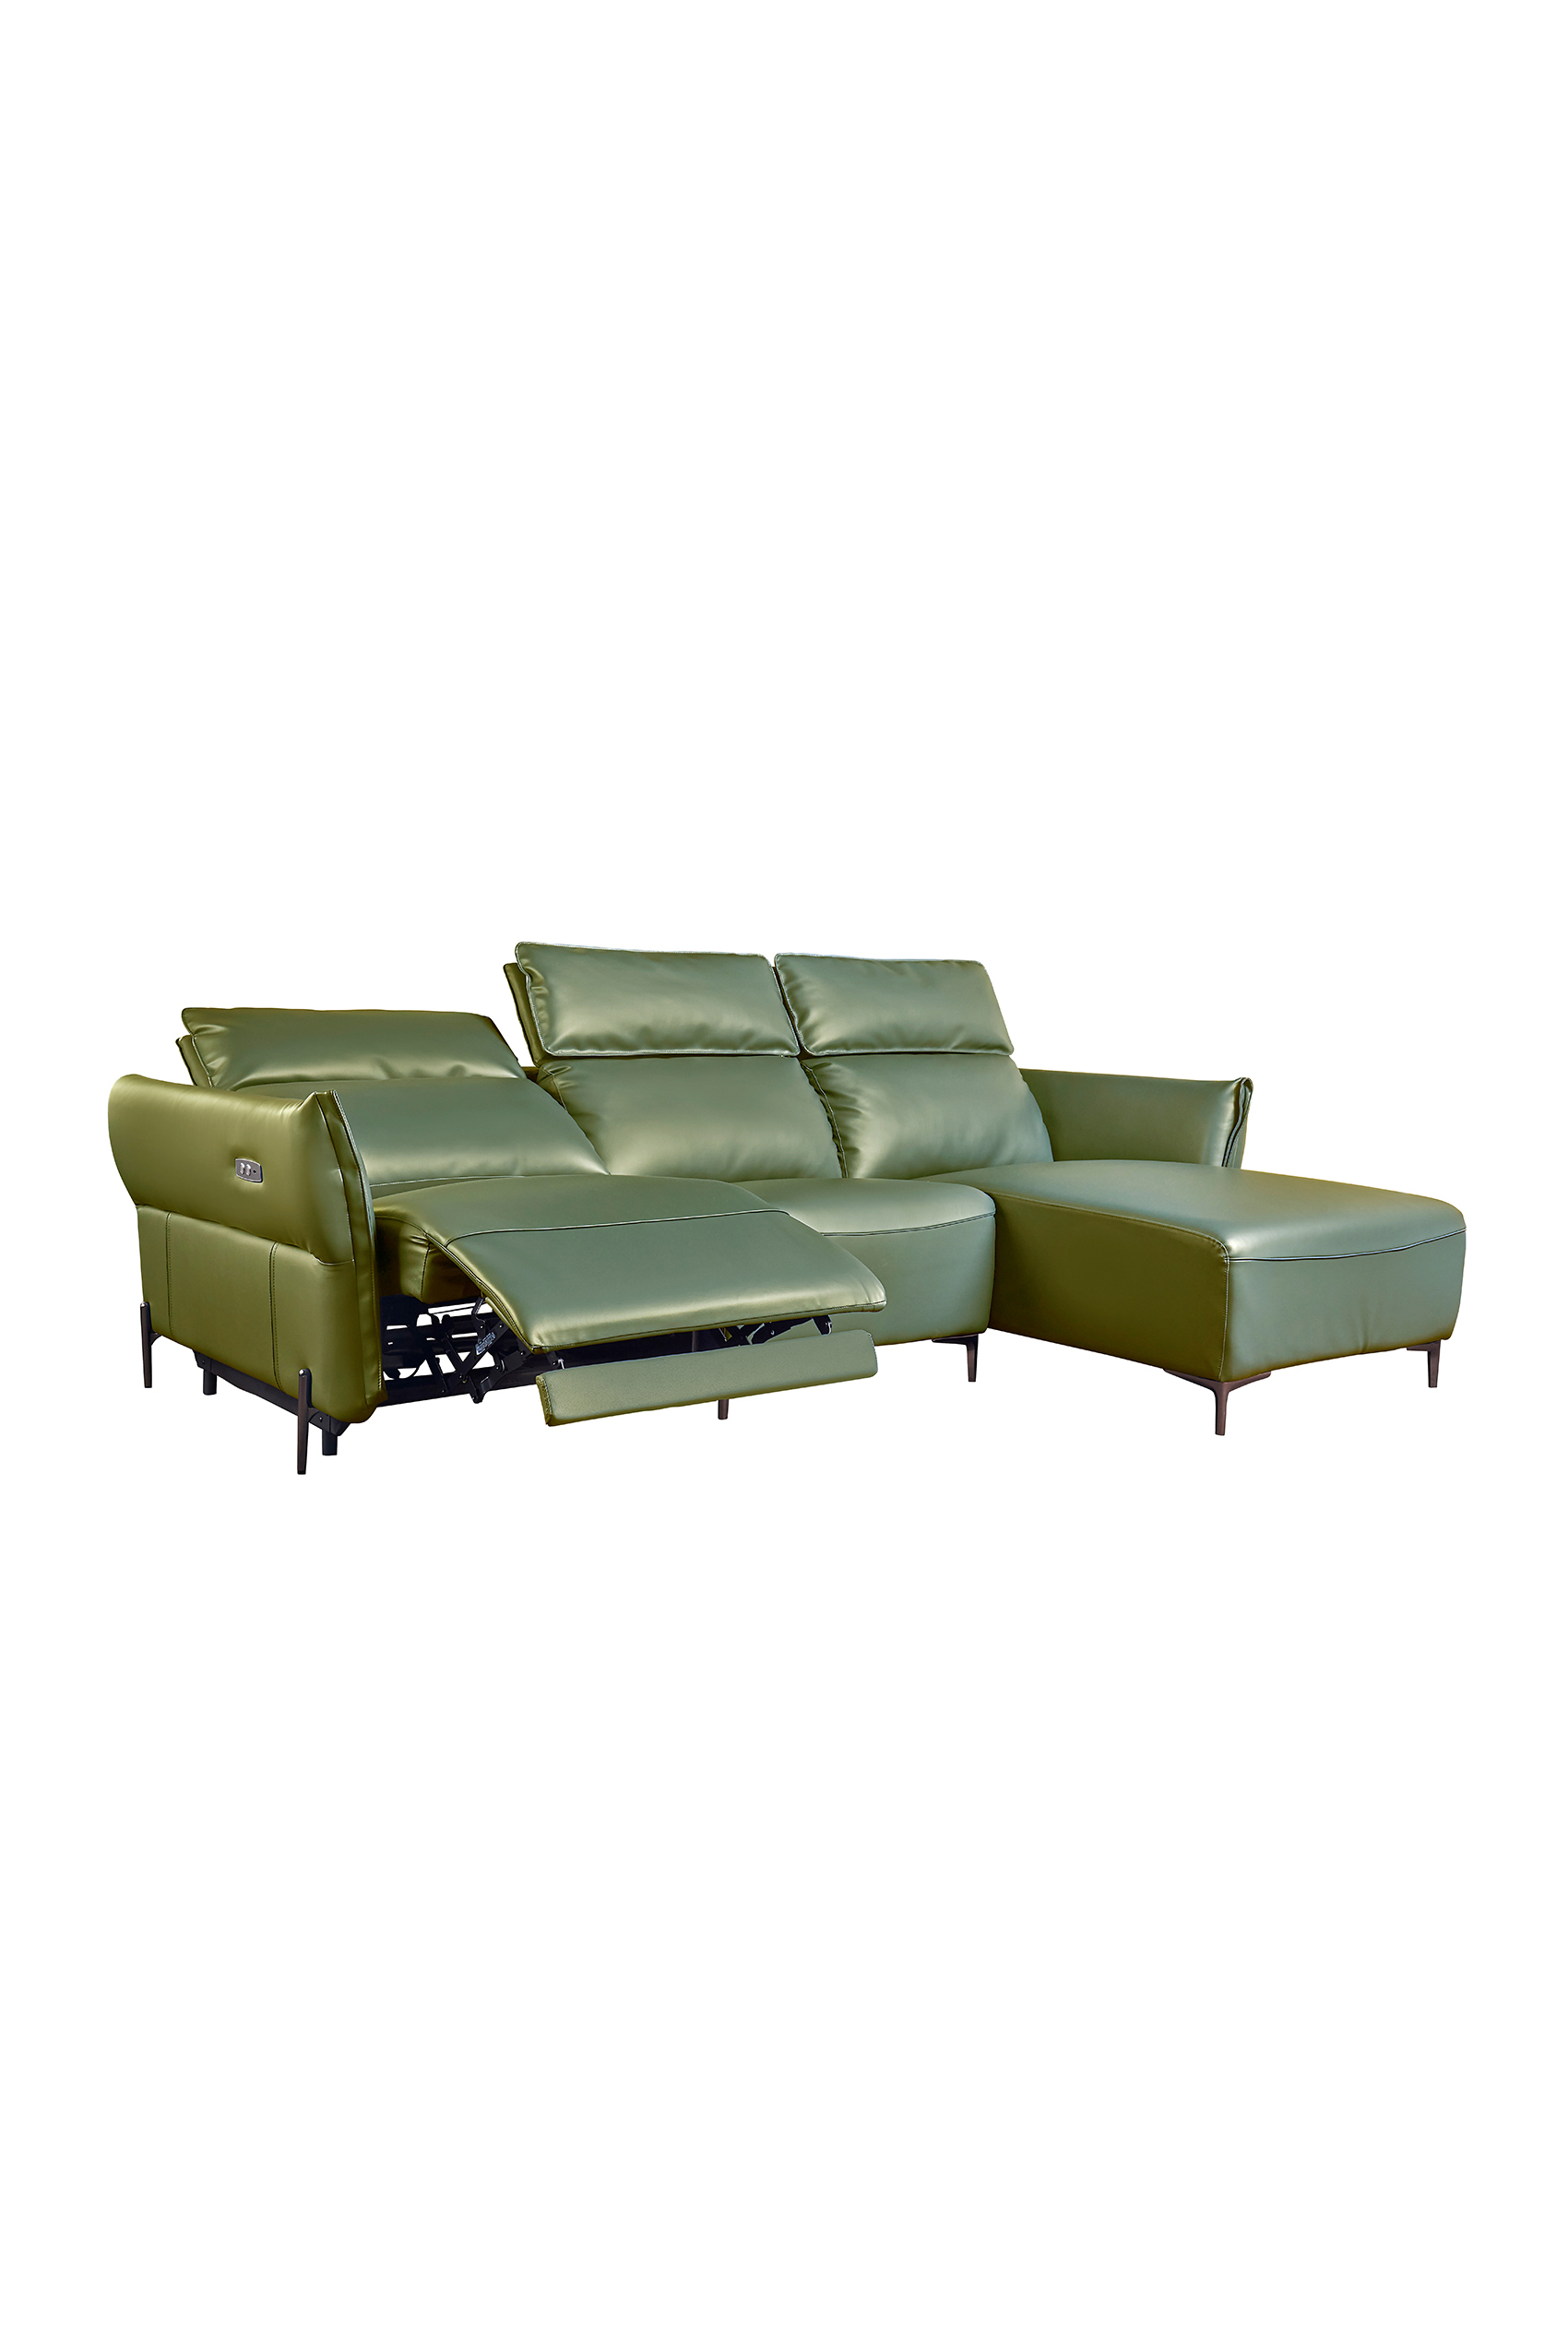 Sarnano Leather Sofa with Recliner